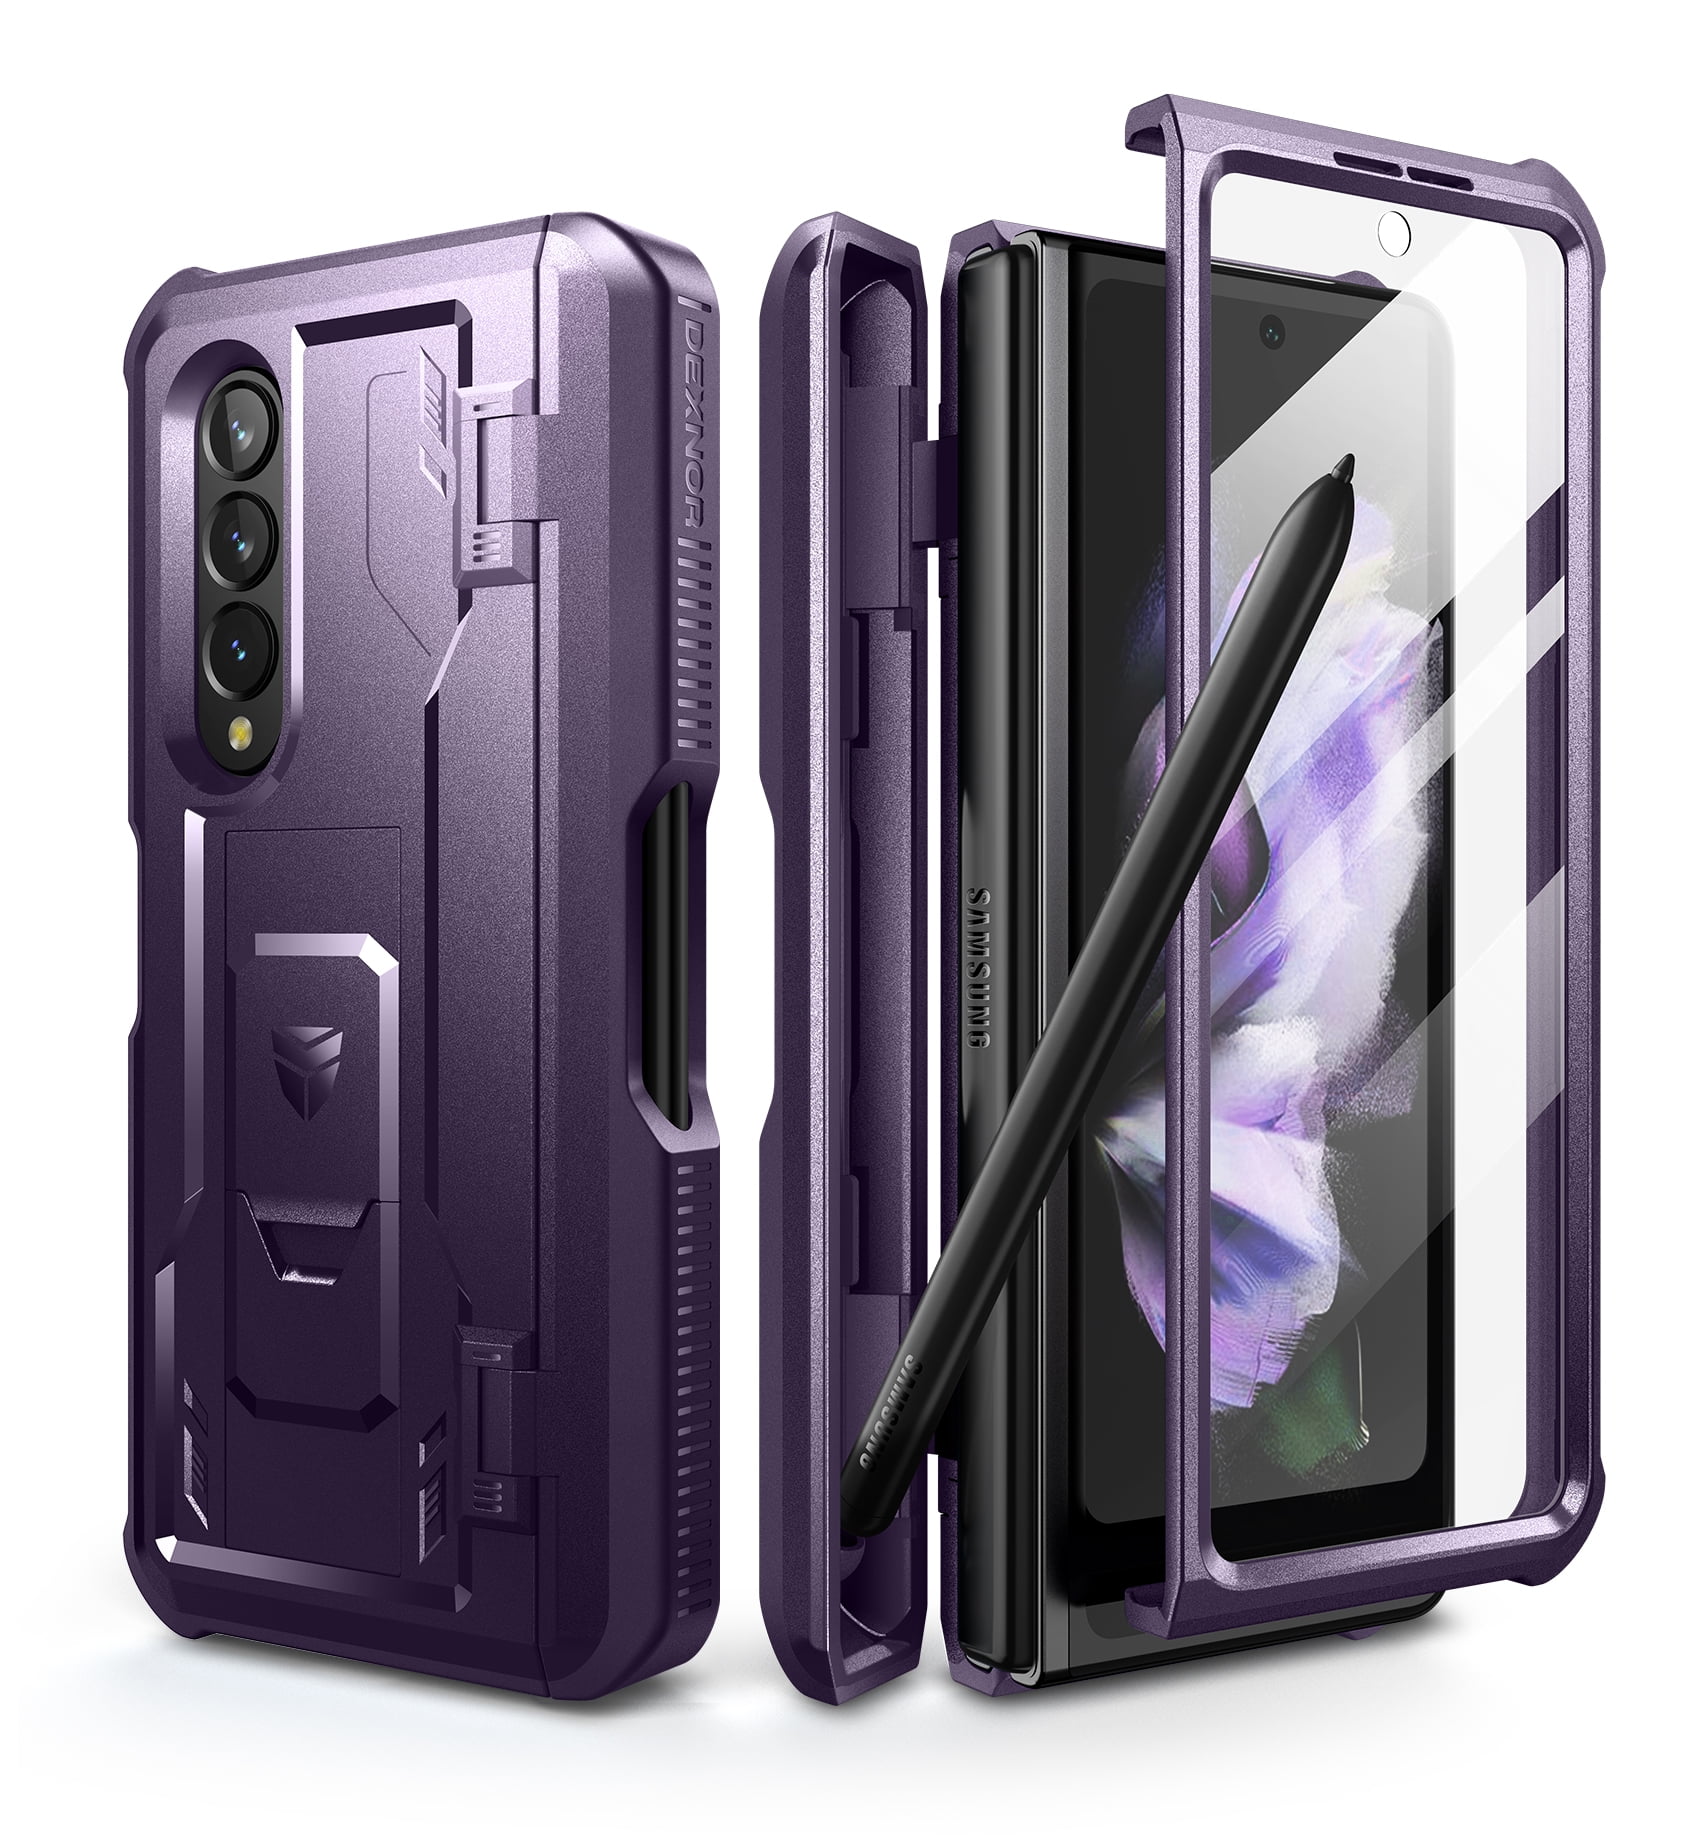 Dexnor Shielder Series Case for Samsung Galaxy Z Fold 3(2021), Military- Grade Full-Body Shockproof Rugged Bumper Case Cover with Built-in Screen  Protector & Kickstand & S Pen Slot,Maroon Red 